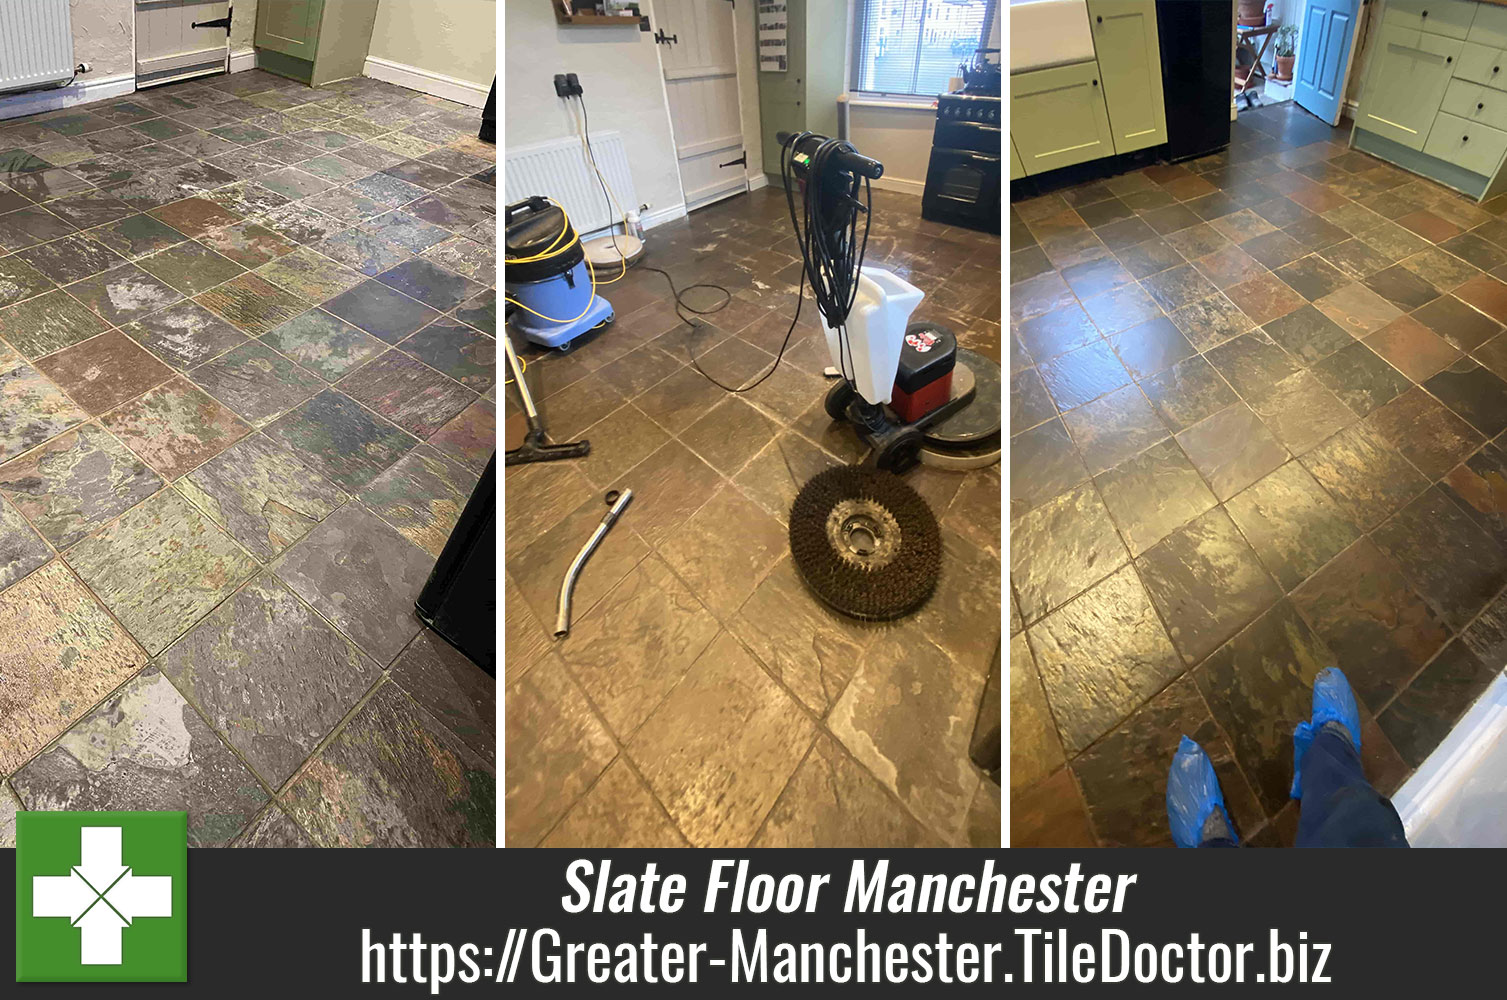 Tile Doctor Oxy-Gel Used to Clean a Water Damaged Slate Floor in Manchester to Reduce Liquids